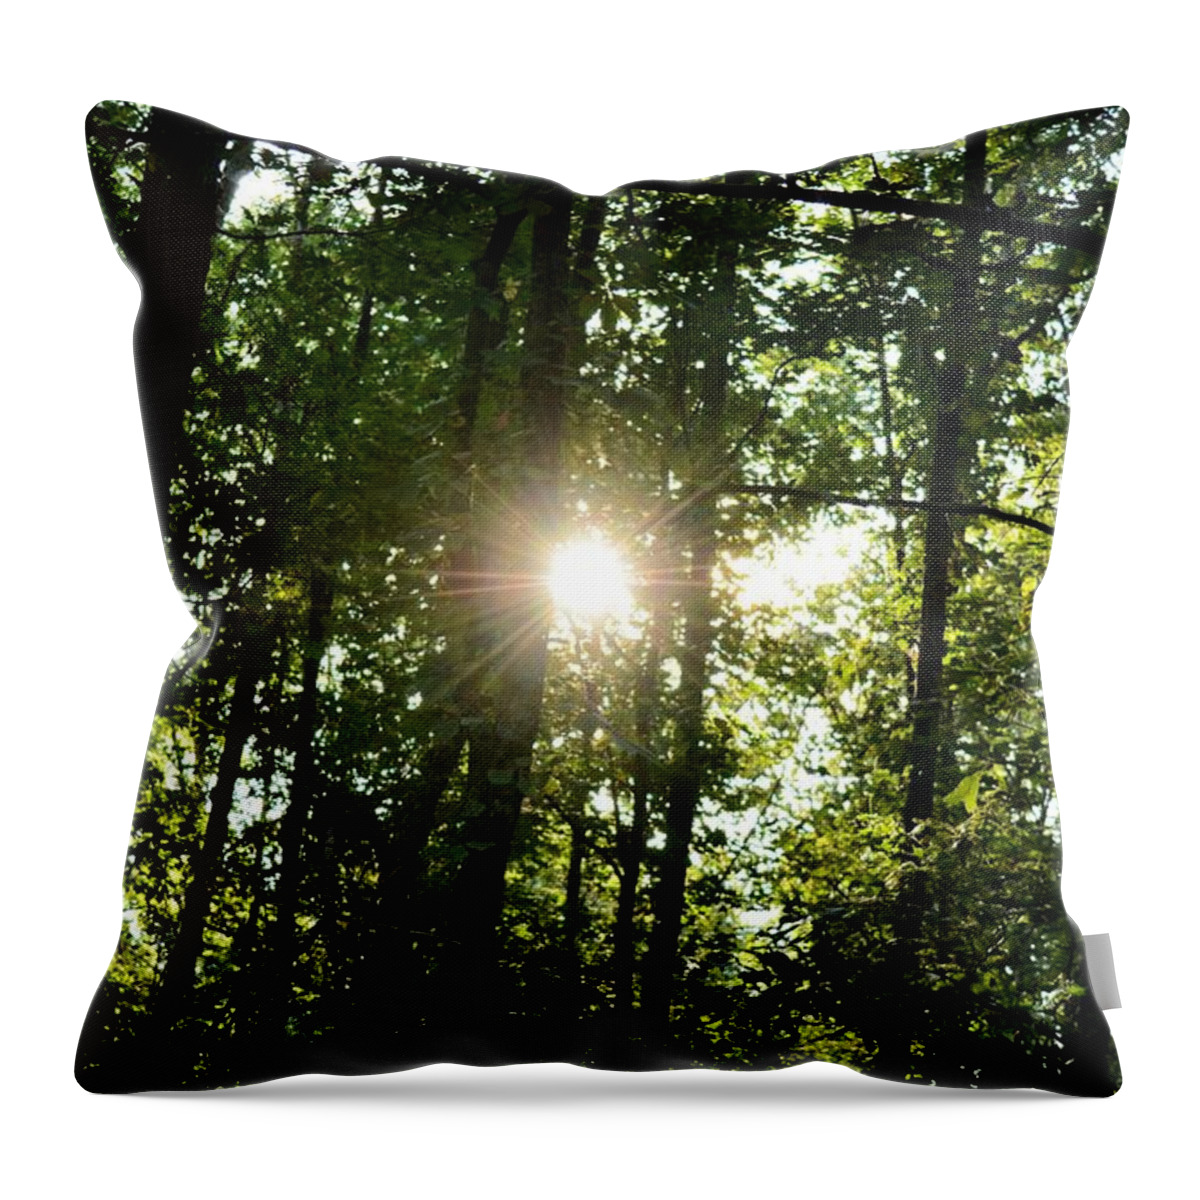 Last Light In The Forest Throw Pillow featuring the photograph Last Light in the Forest by Maria Urso